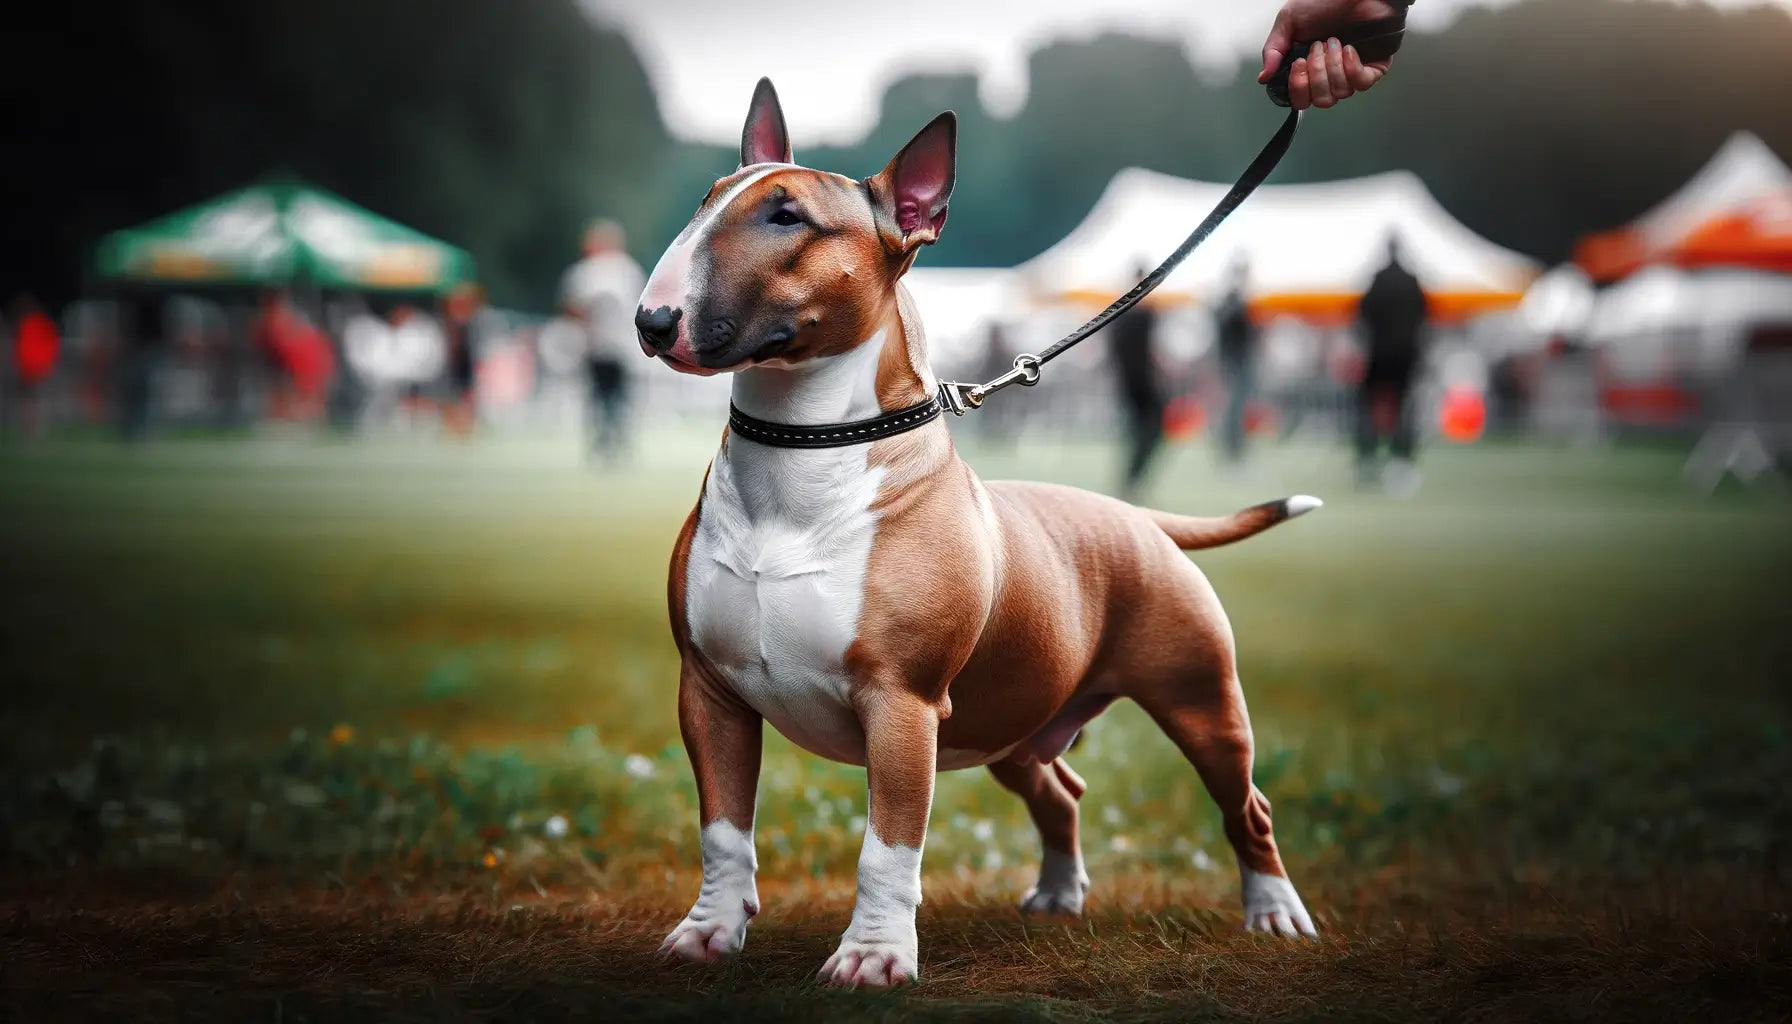 A Bull Terrier on a leash stands on grass, displaying its sturdy body structure in a stance that exemplifies the breed's strength and confidence.